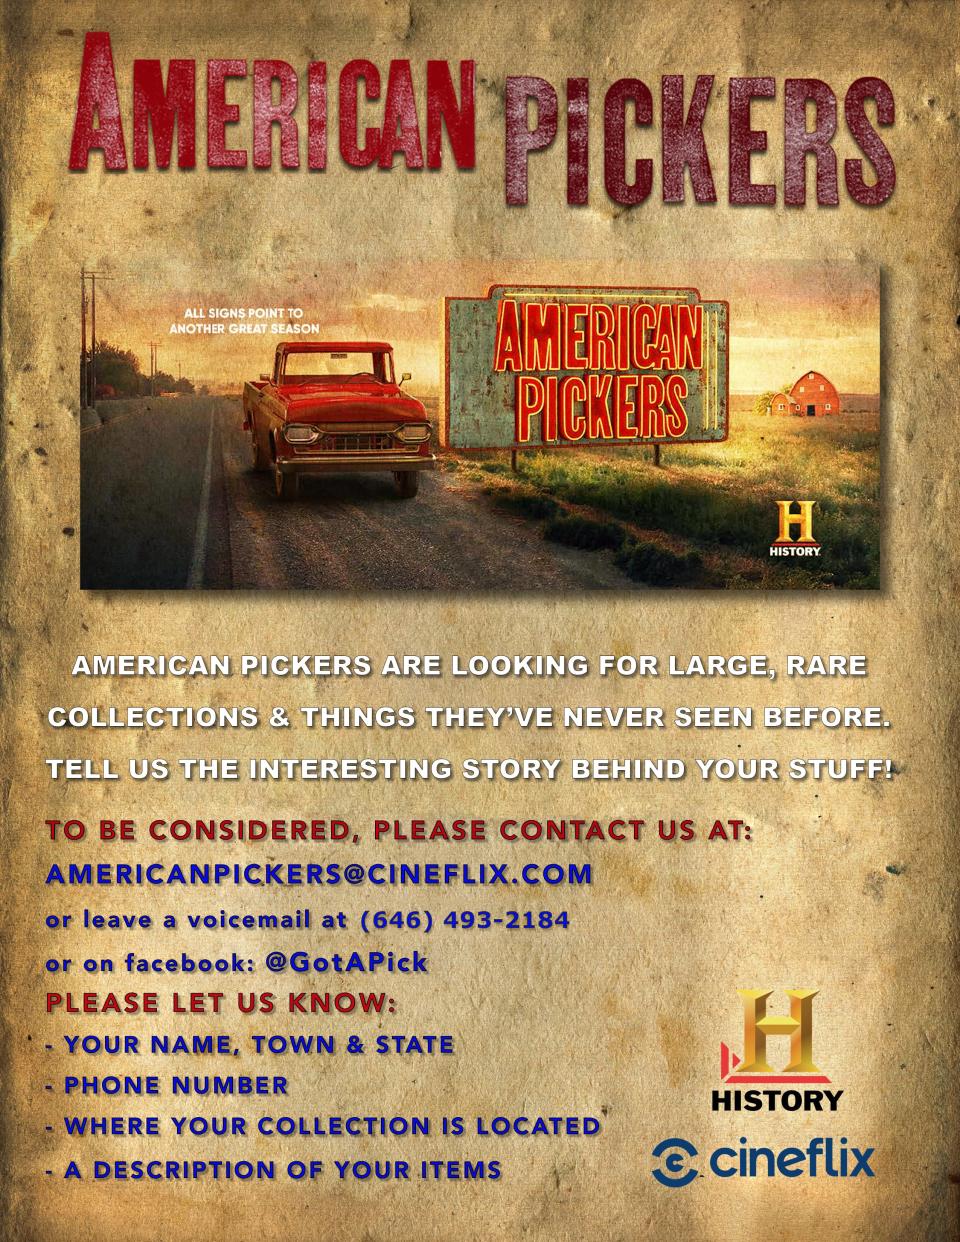 "American Pickers," the popular documentary series that explores the fascinating world of antique “picking” on The History Channel, is heading back to Kentucky.